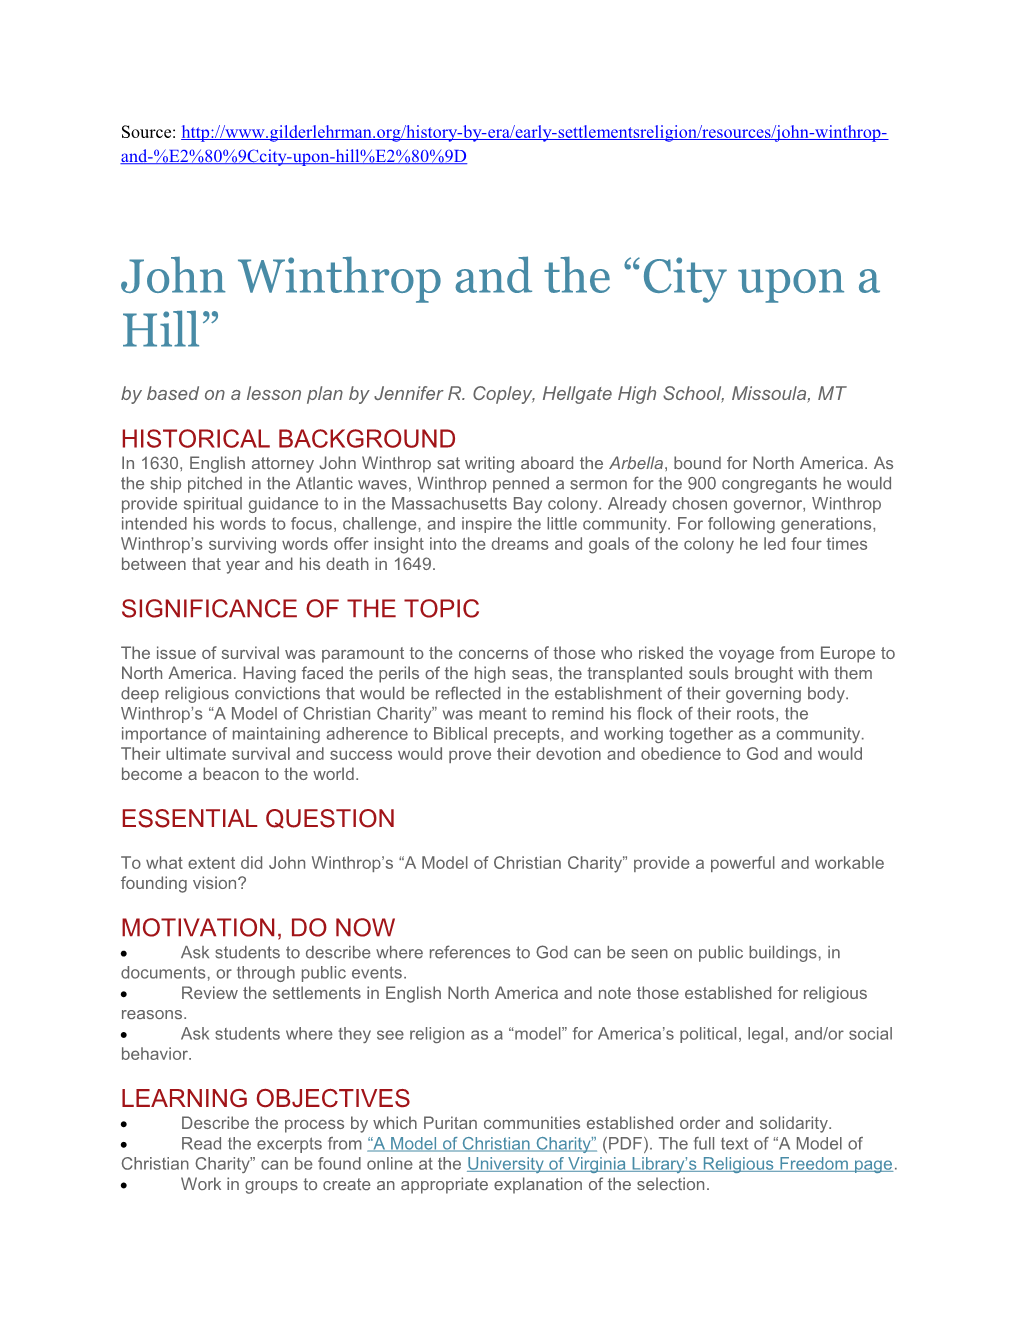 John Winthrop and the City Upon a Hill